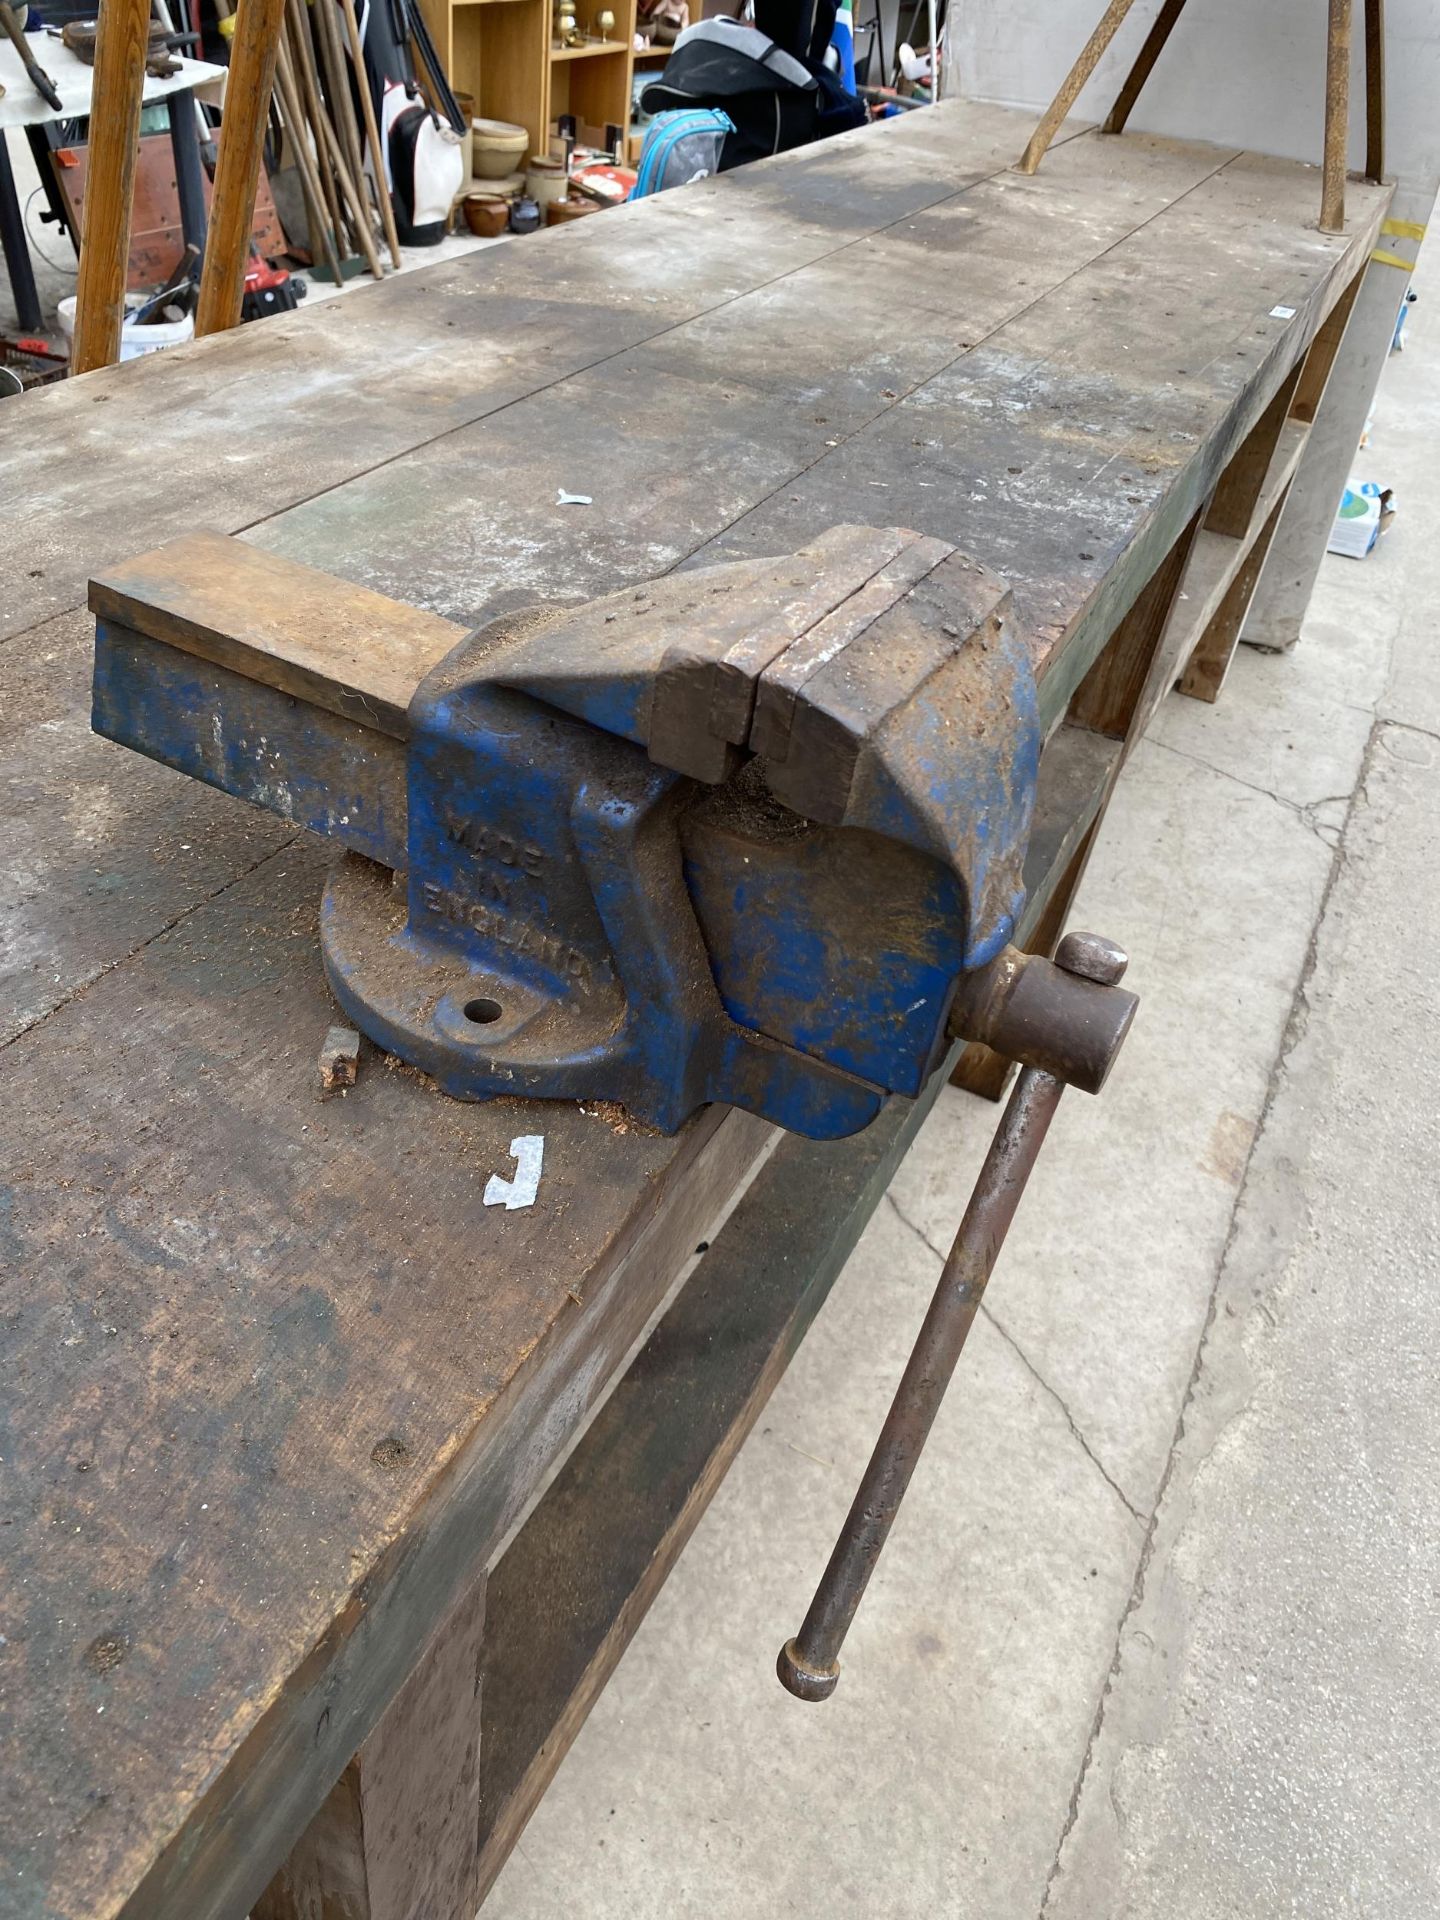 A VERY LARGE WOODEN WORK BENCH WITH RECORD NO.5 BENCH VICE ATTATCHED (L:410CM) - Image 3 of 5